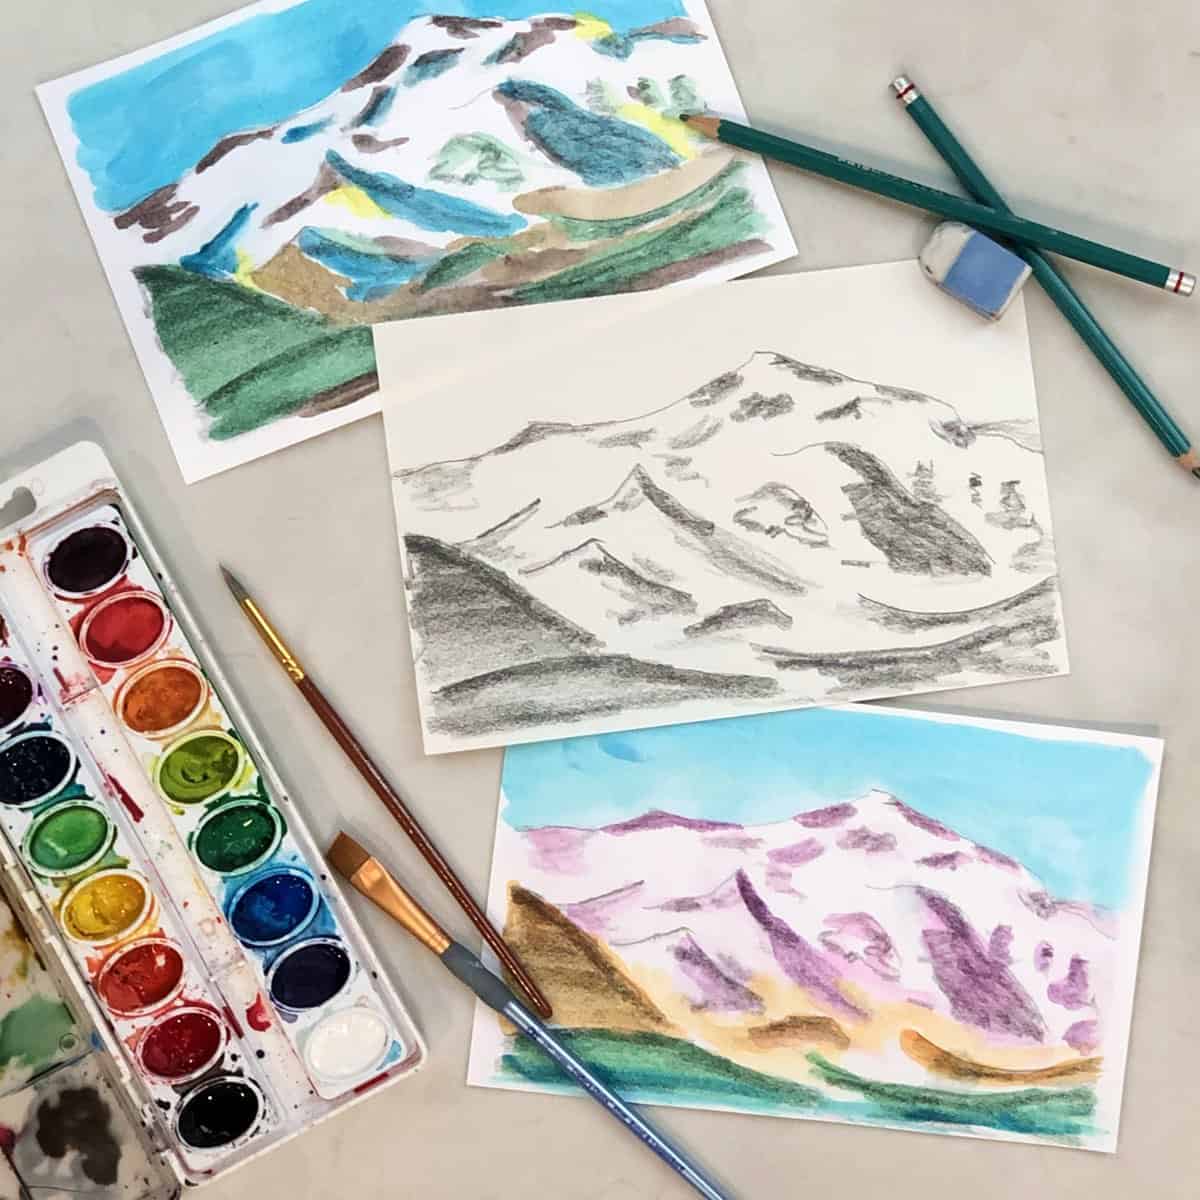 Drawing a Mountain Landscape Scene with Easy Pencil Sketch -  artlooklearn.com